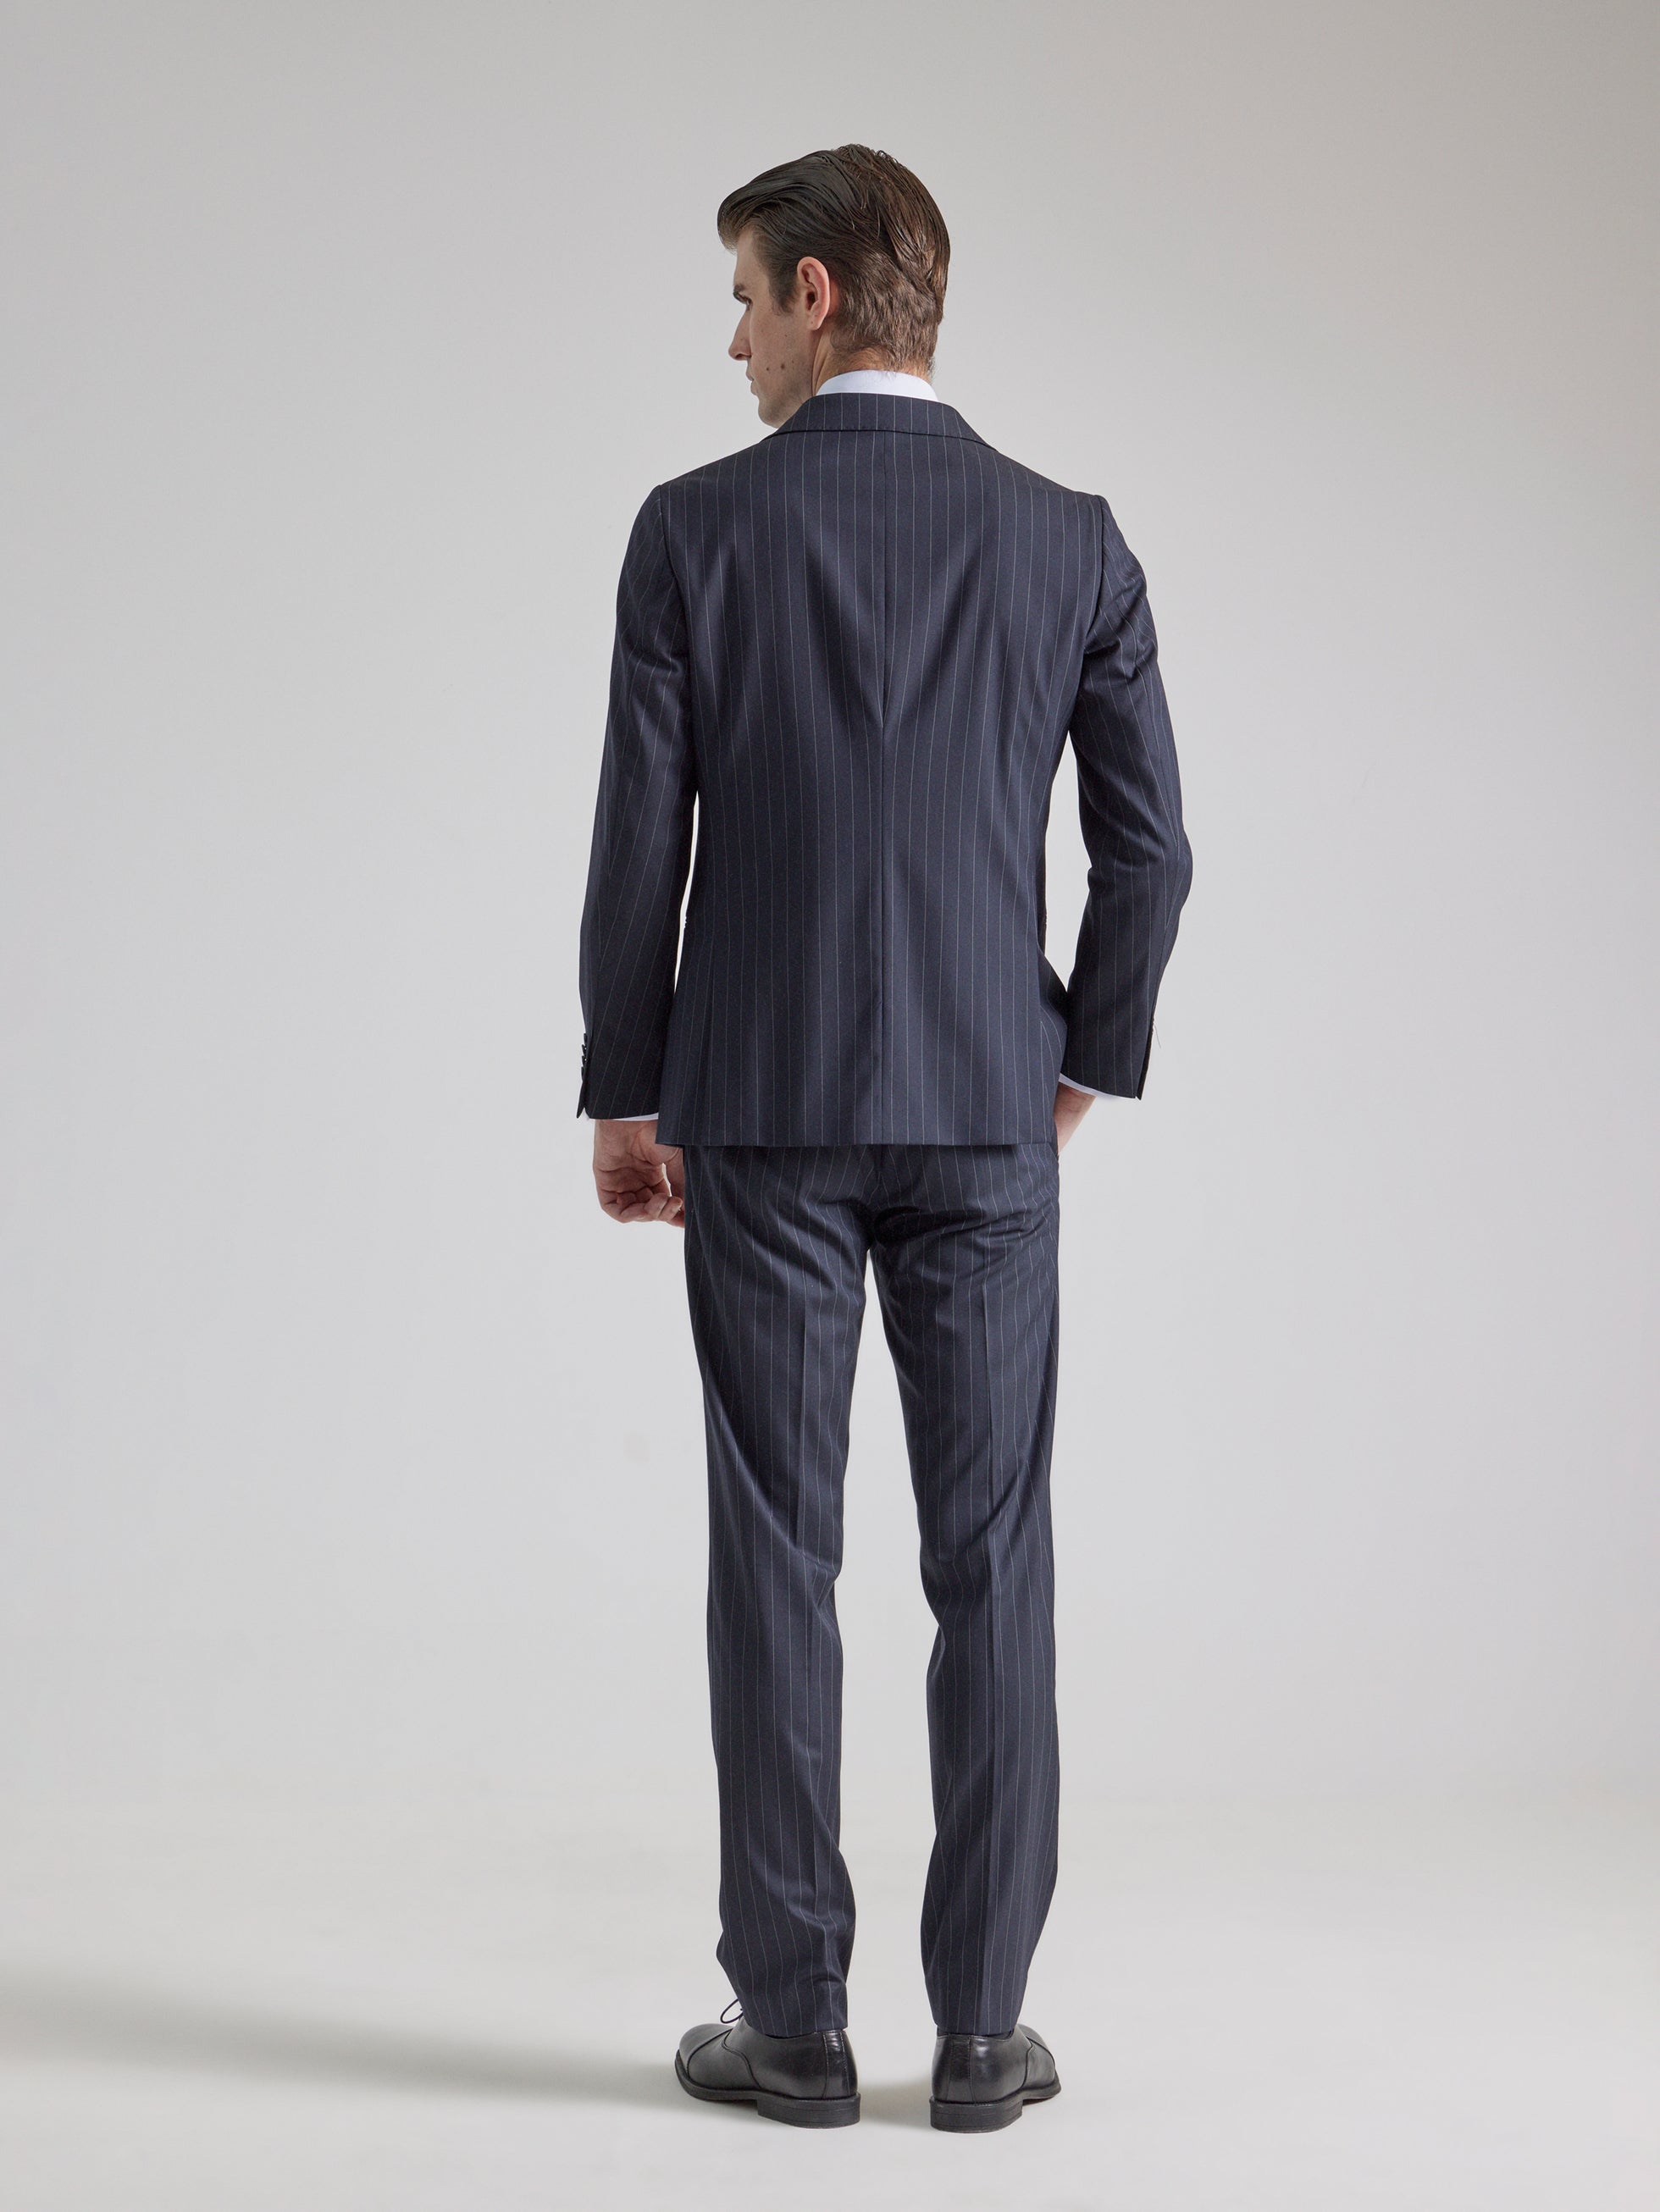 NAVY PINSTRIPE DOUBLE-BREASTED SUIT